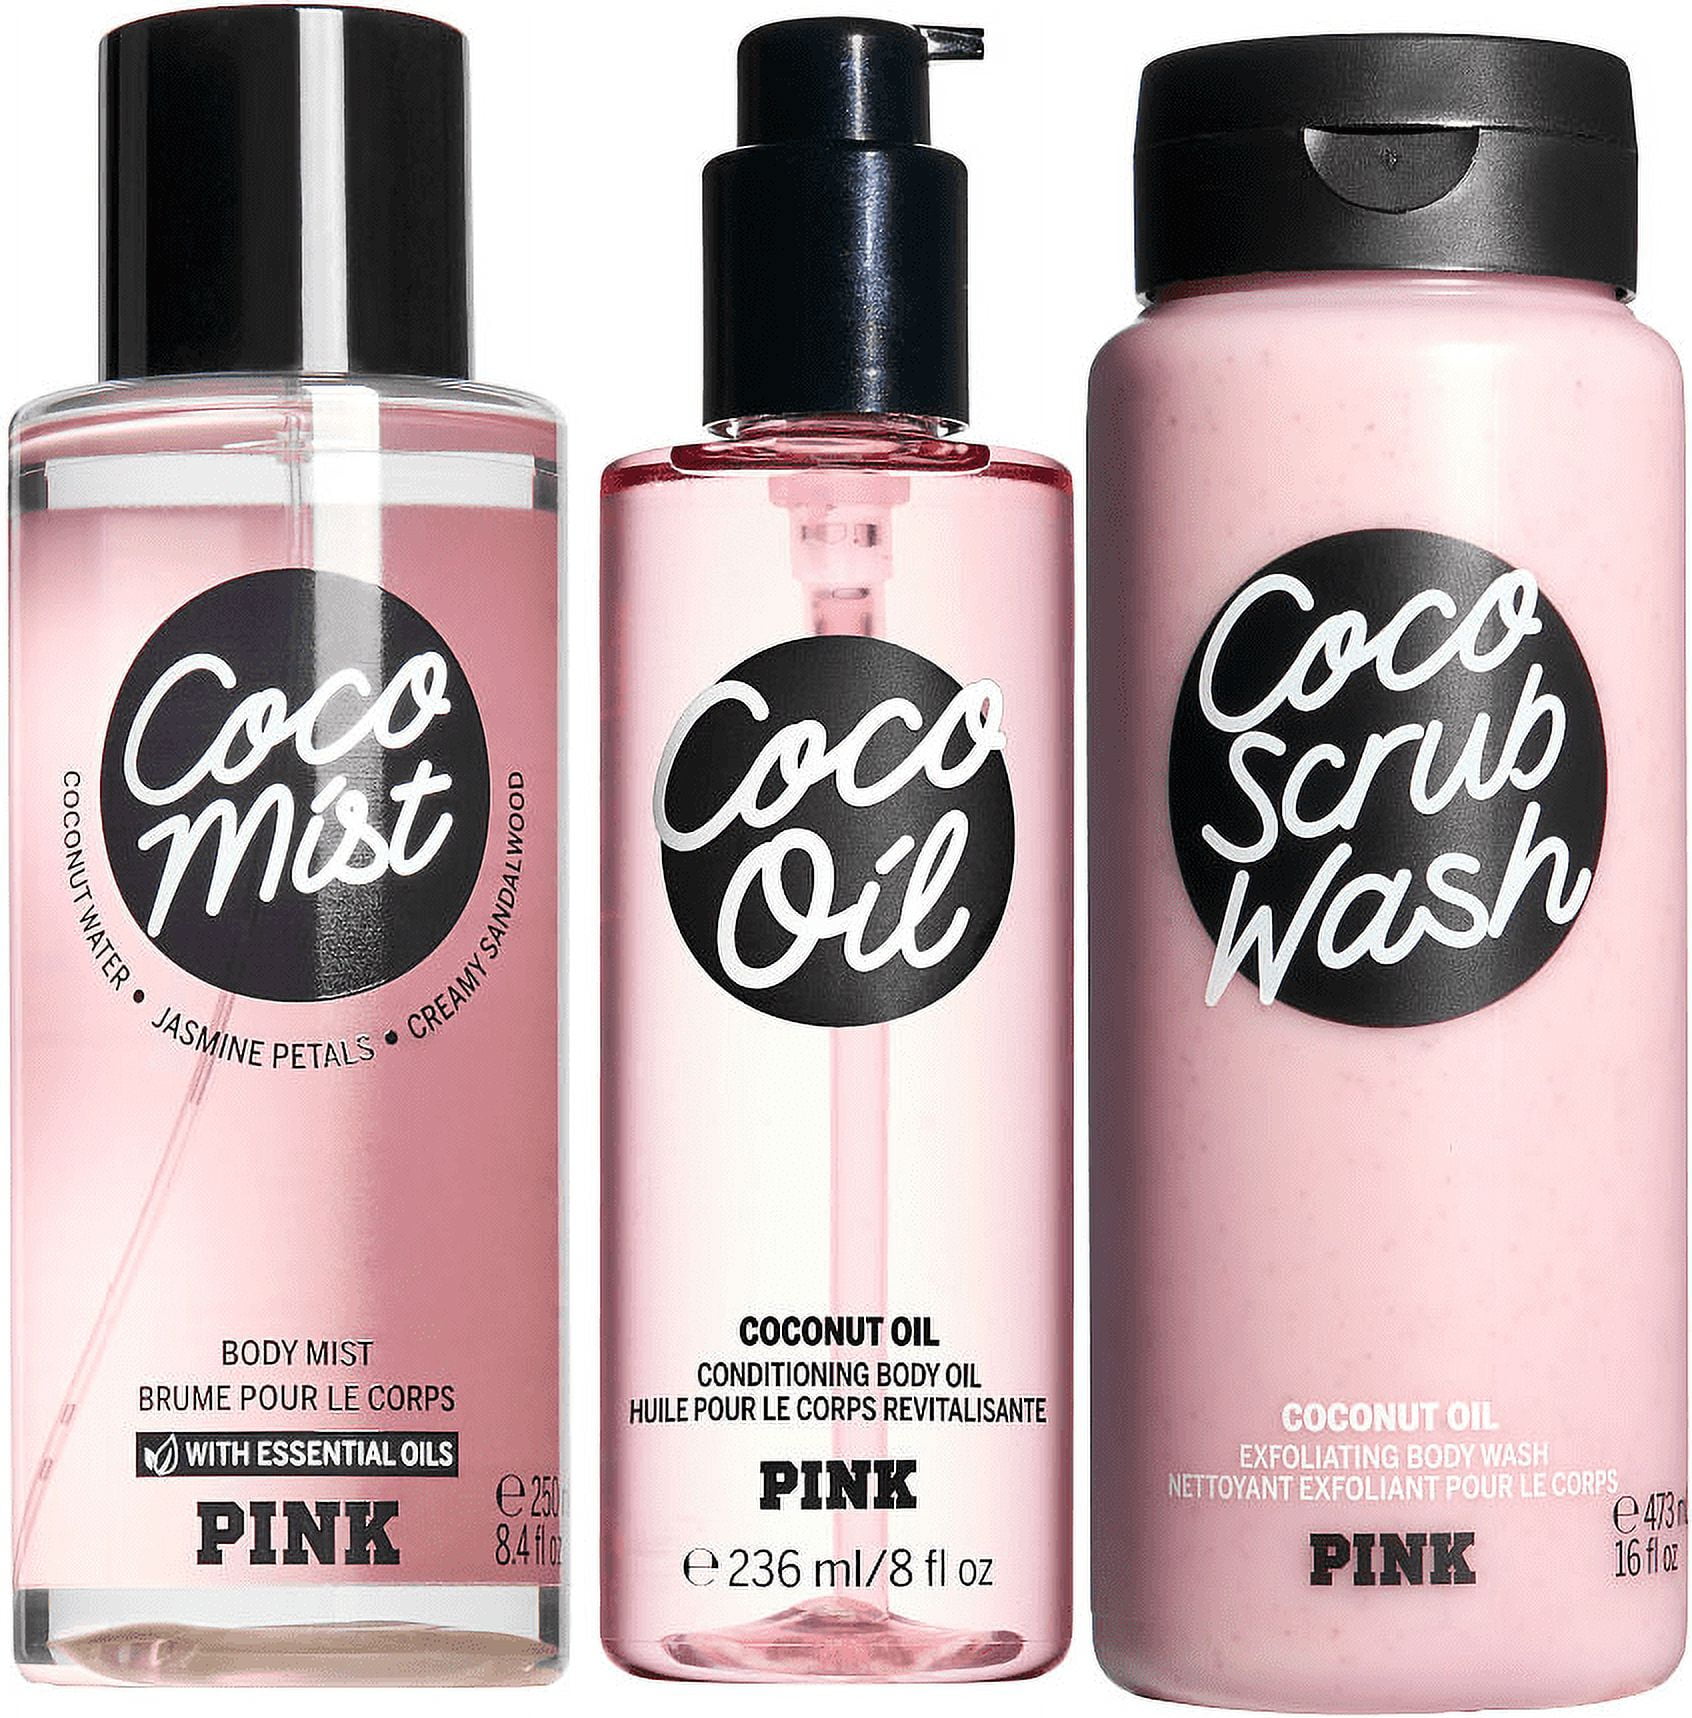 Win win shopping on Instagram: Coco oil and mist❤️❤️#cocooil #cocomist  #pink #victoriassecret #gift #cadeau